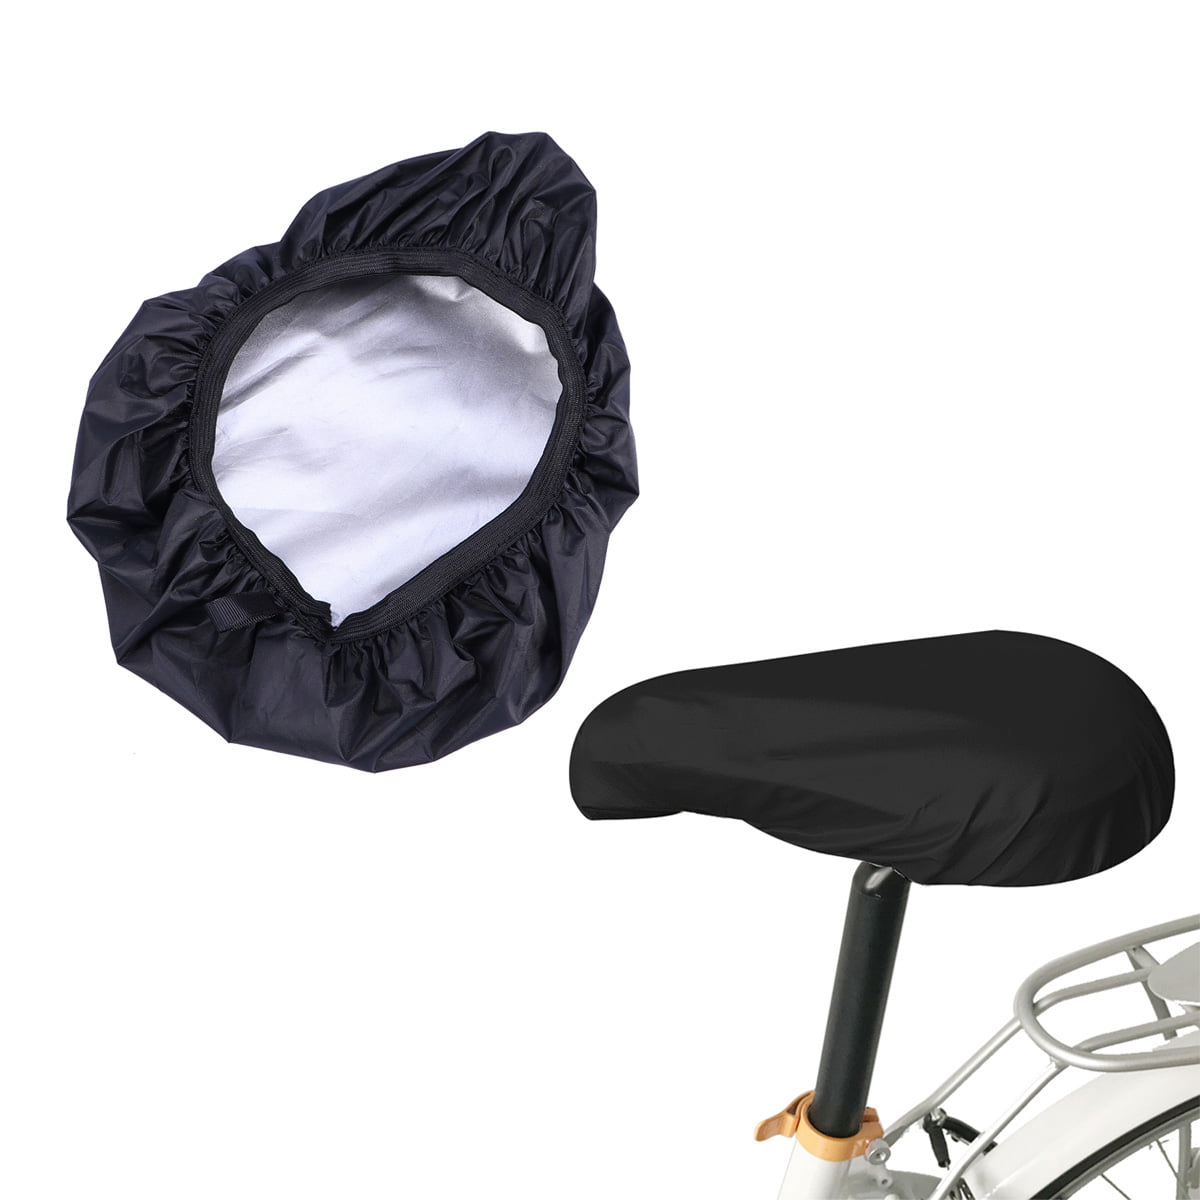 Tyouki Bike Seat Cover Extra Comfortable Bicycle Seat with Soft sponge Cycle Saddle Cushion Bicycle Pad Cover Saddle Covers-Perfect for Most Narrow Bike Seats,Exercise Bike/Road Mountain Bike